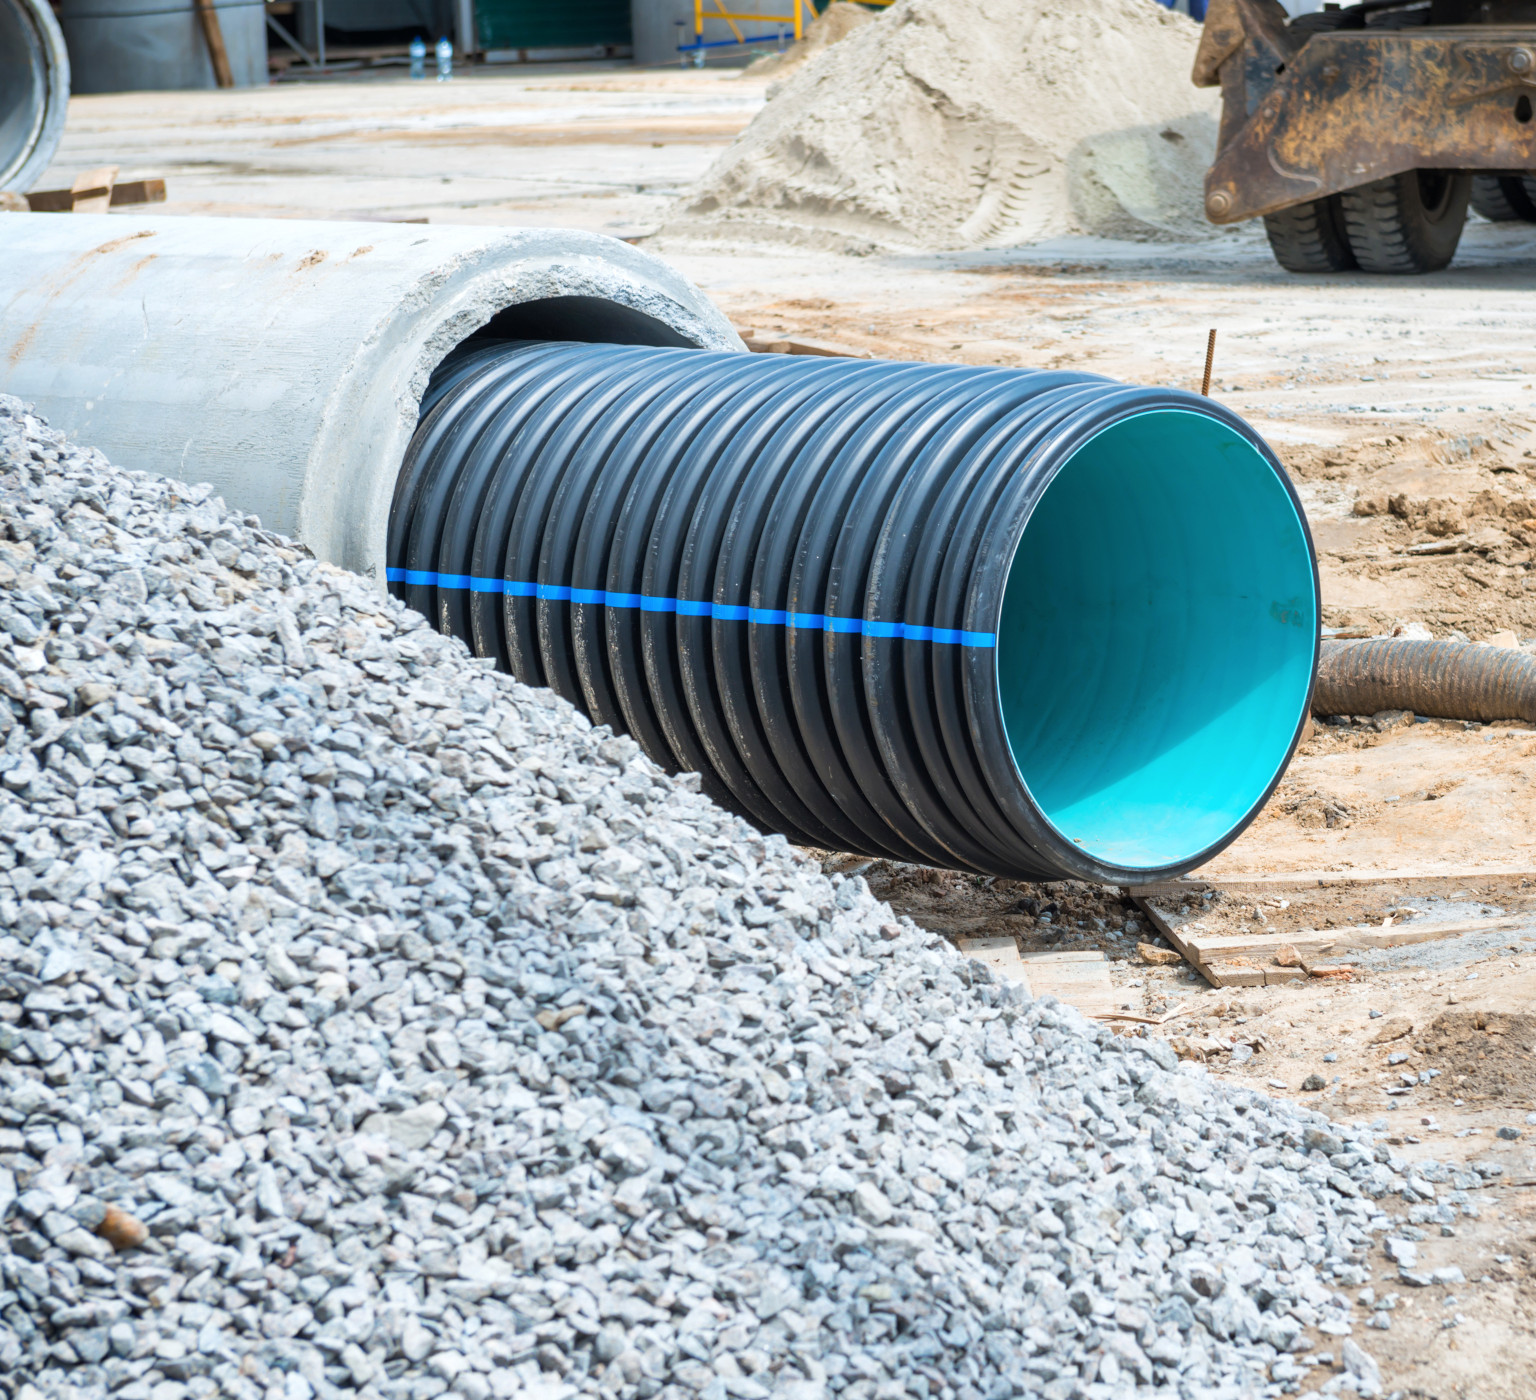 Corrugated sewer pipe